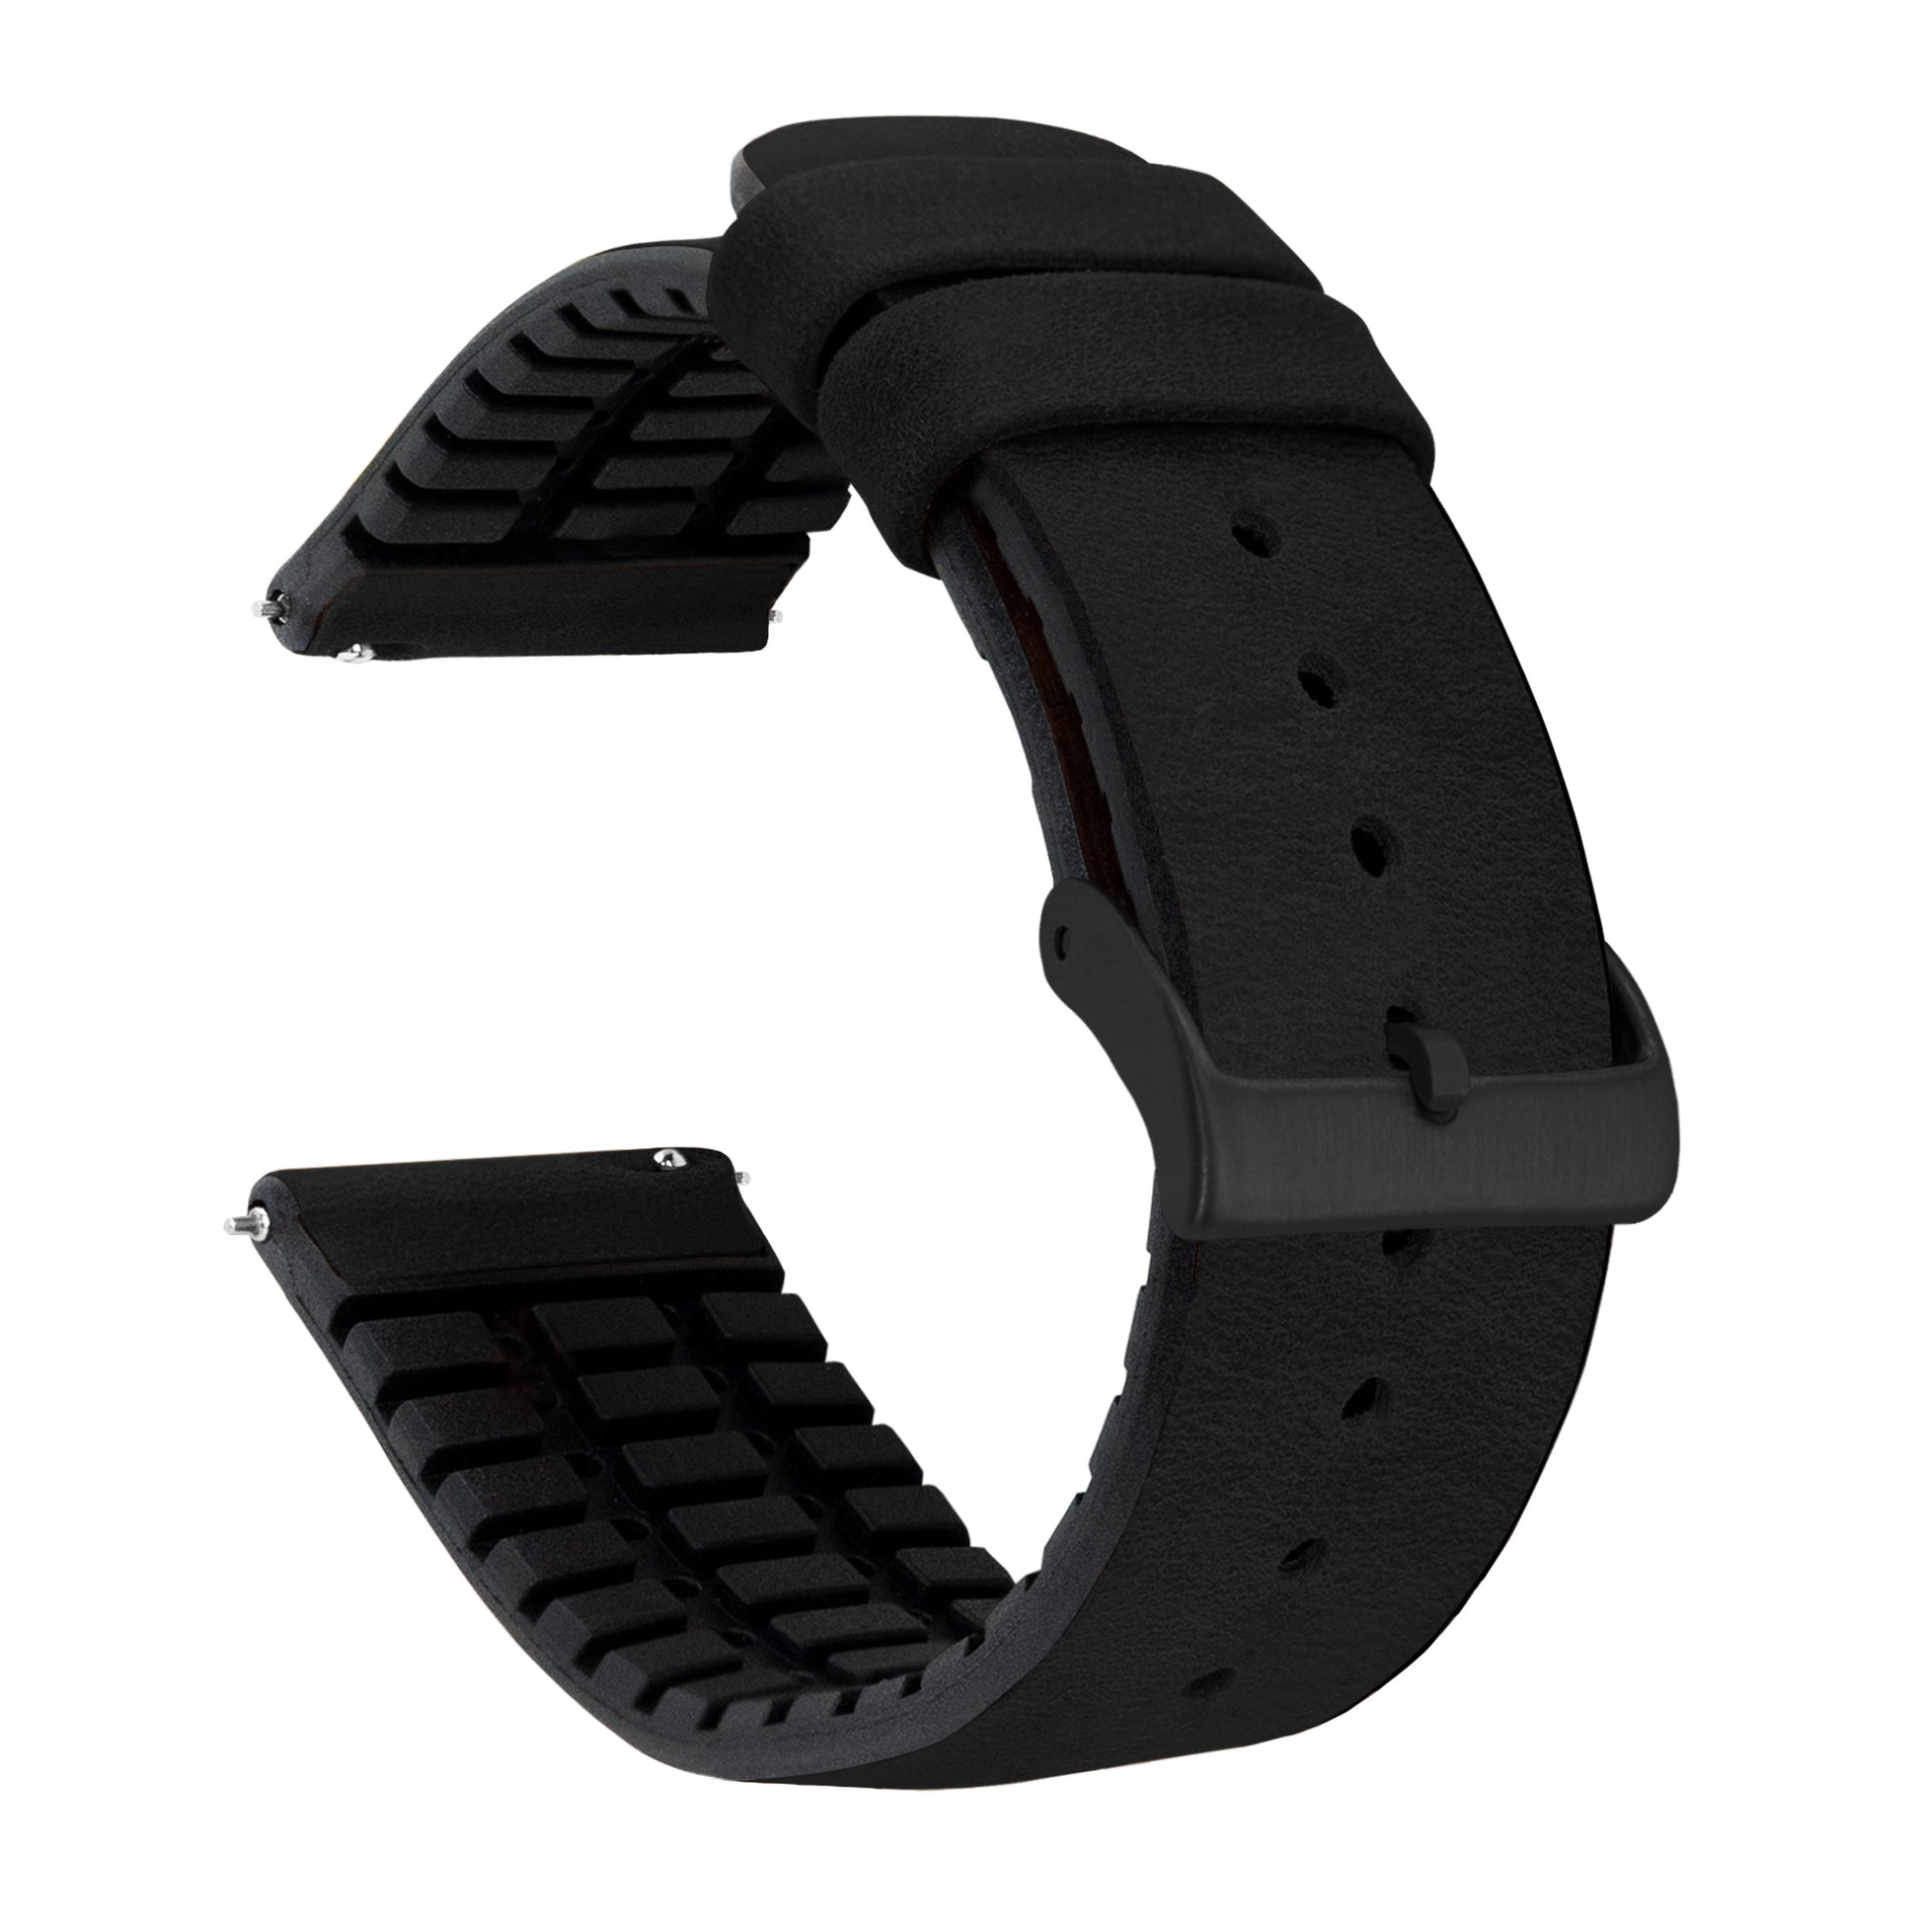 Gear Sport | Leather and Rubber Hybrid | Black - Barton Watch Bands